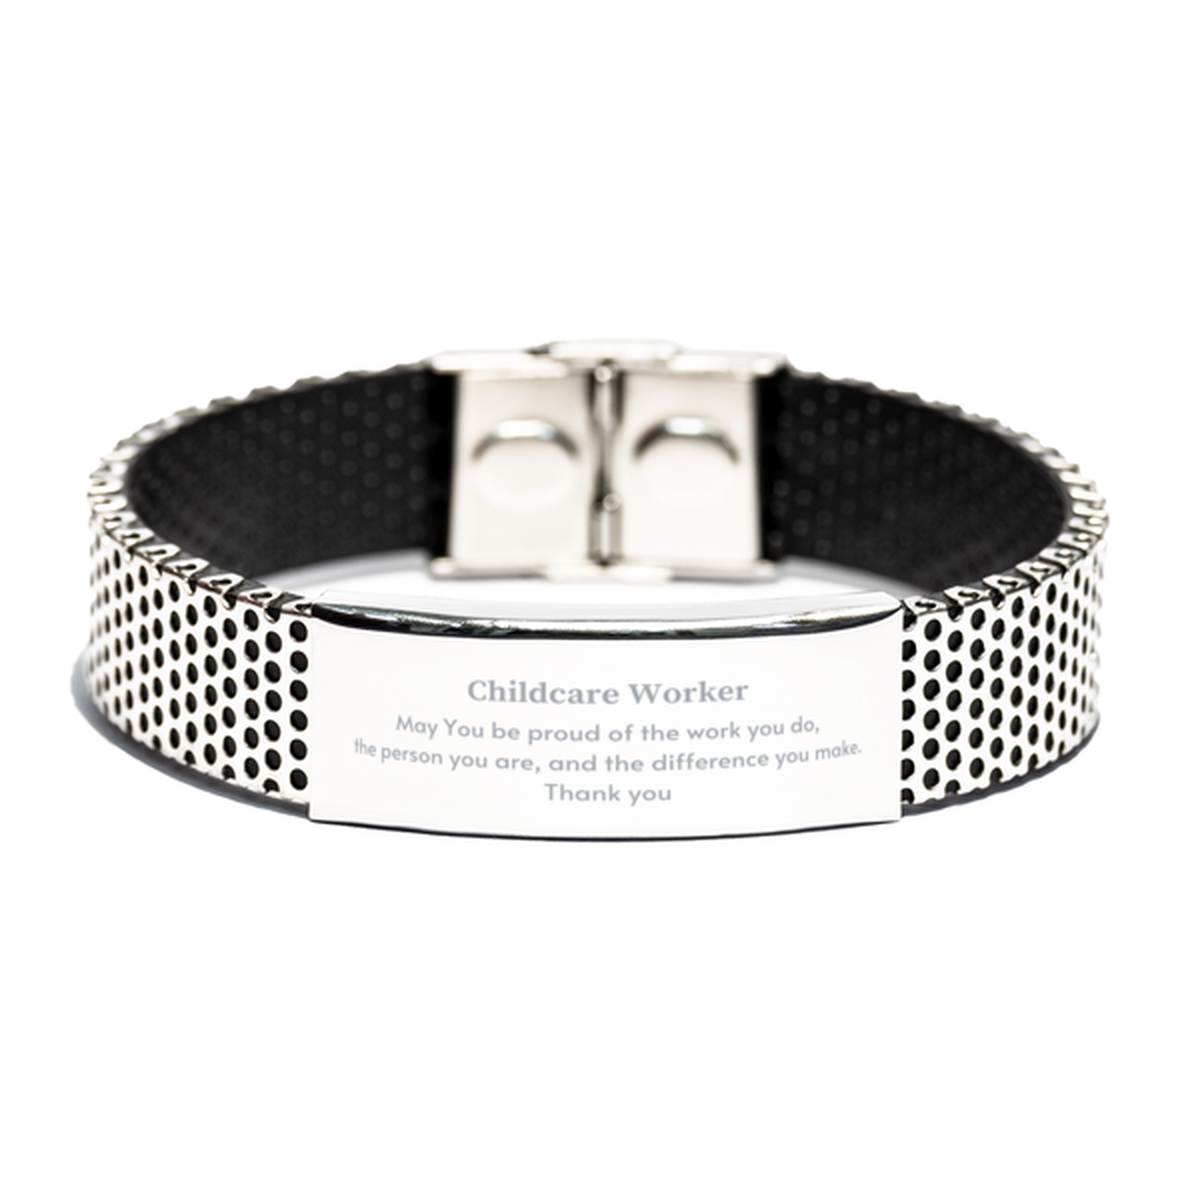 Heartwarming Stainless Steel Bracelet Retirement Coworkers Gifts for Childcare Worker, Childcare Worker May You be proud of the work you do, the person you are Gifts for Boss Men Women Friends